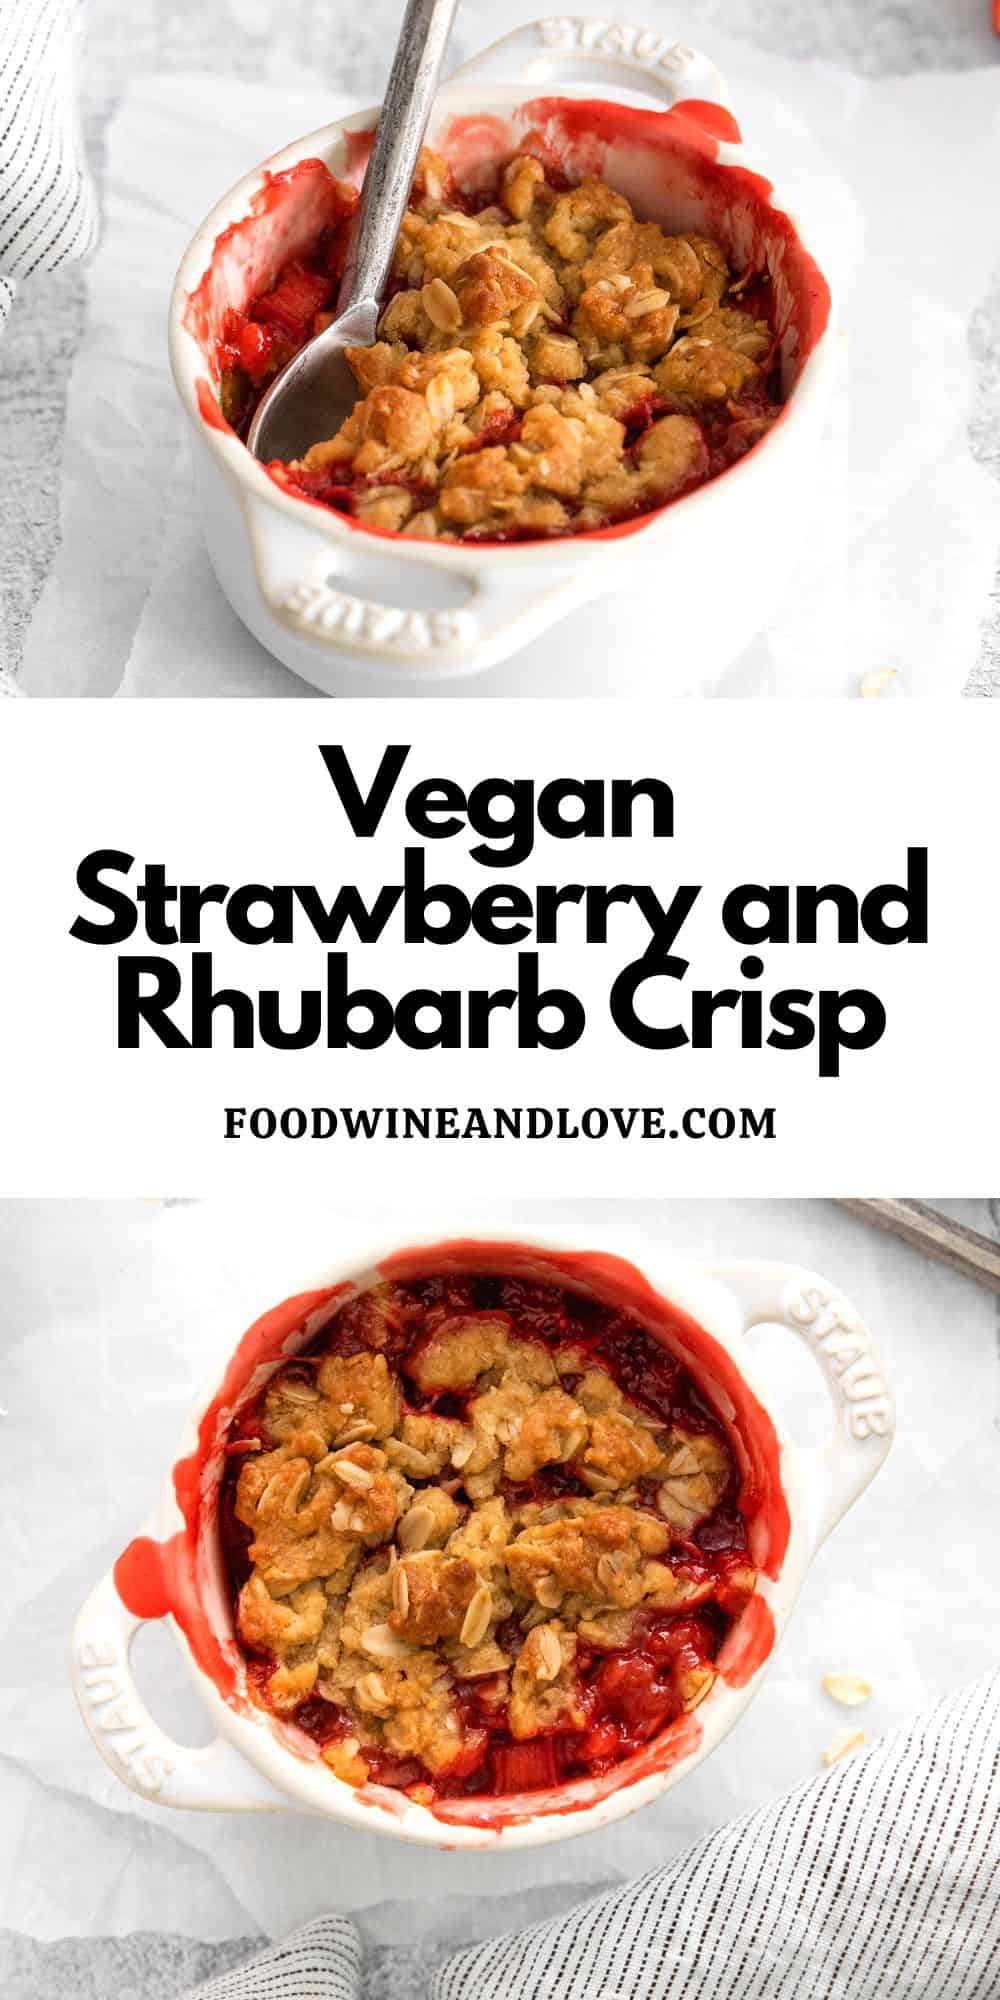 Vegan Strawberry Rhubarb Crisp, a simple and tasty oven baked dessert recipe made with fresh fruit and oats.